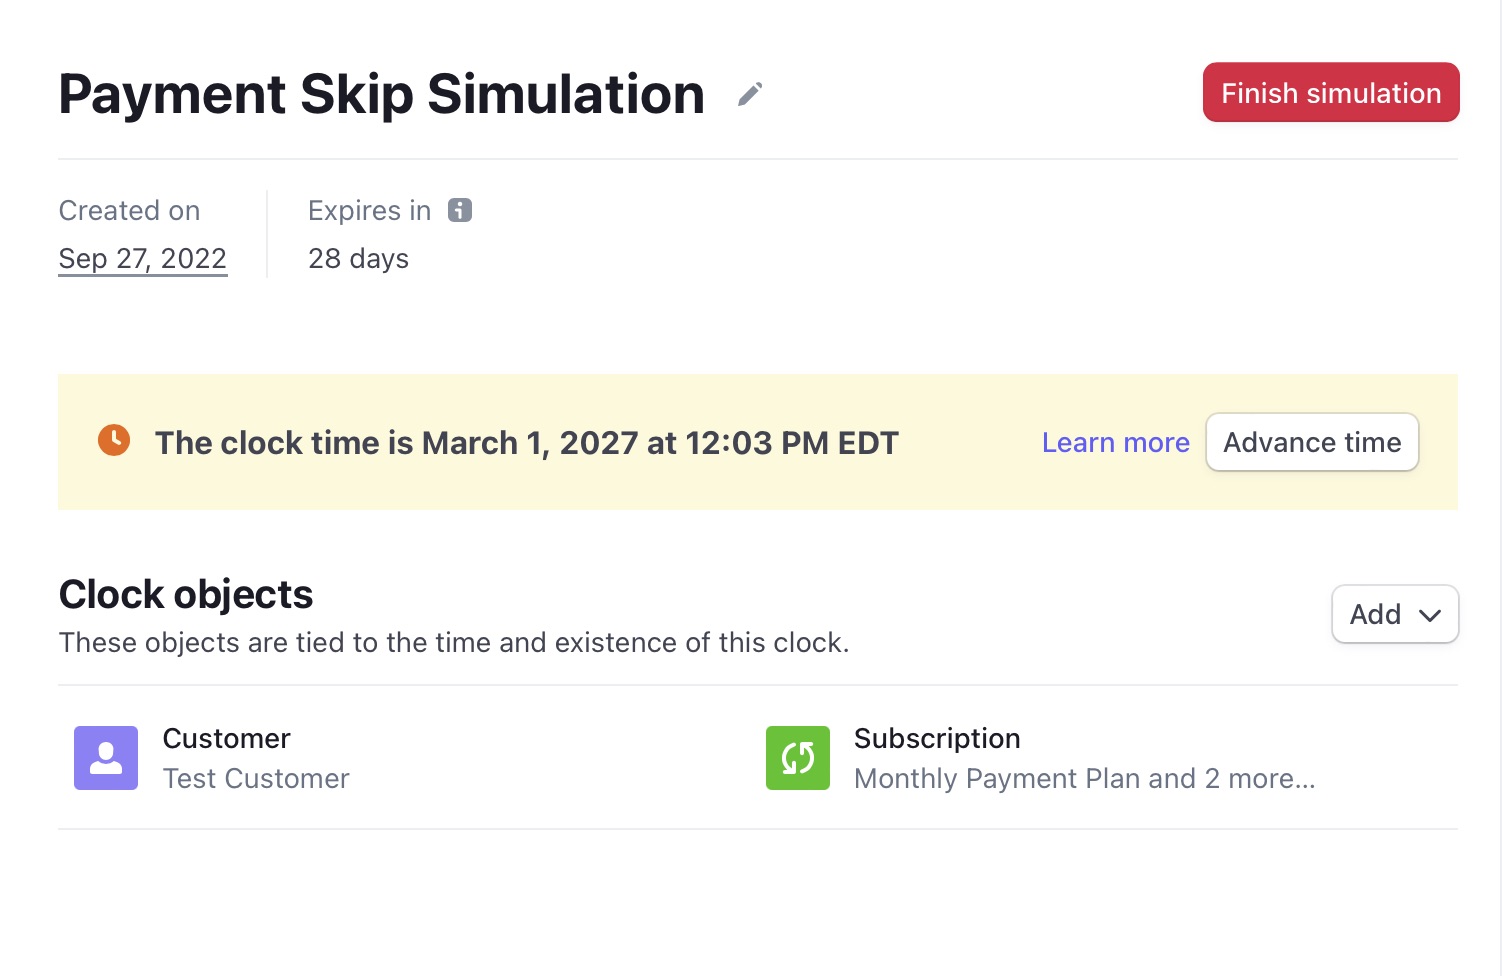 How to advance the test clock simulation